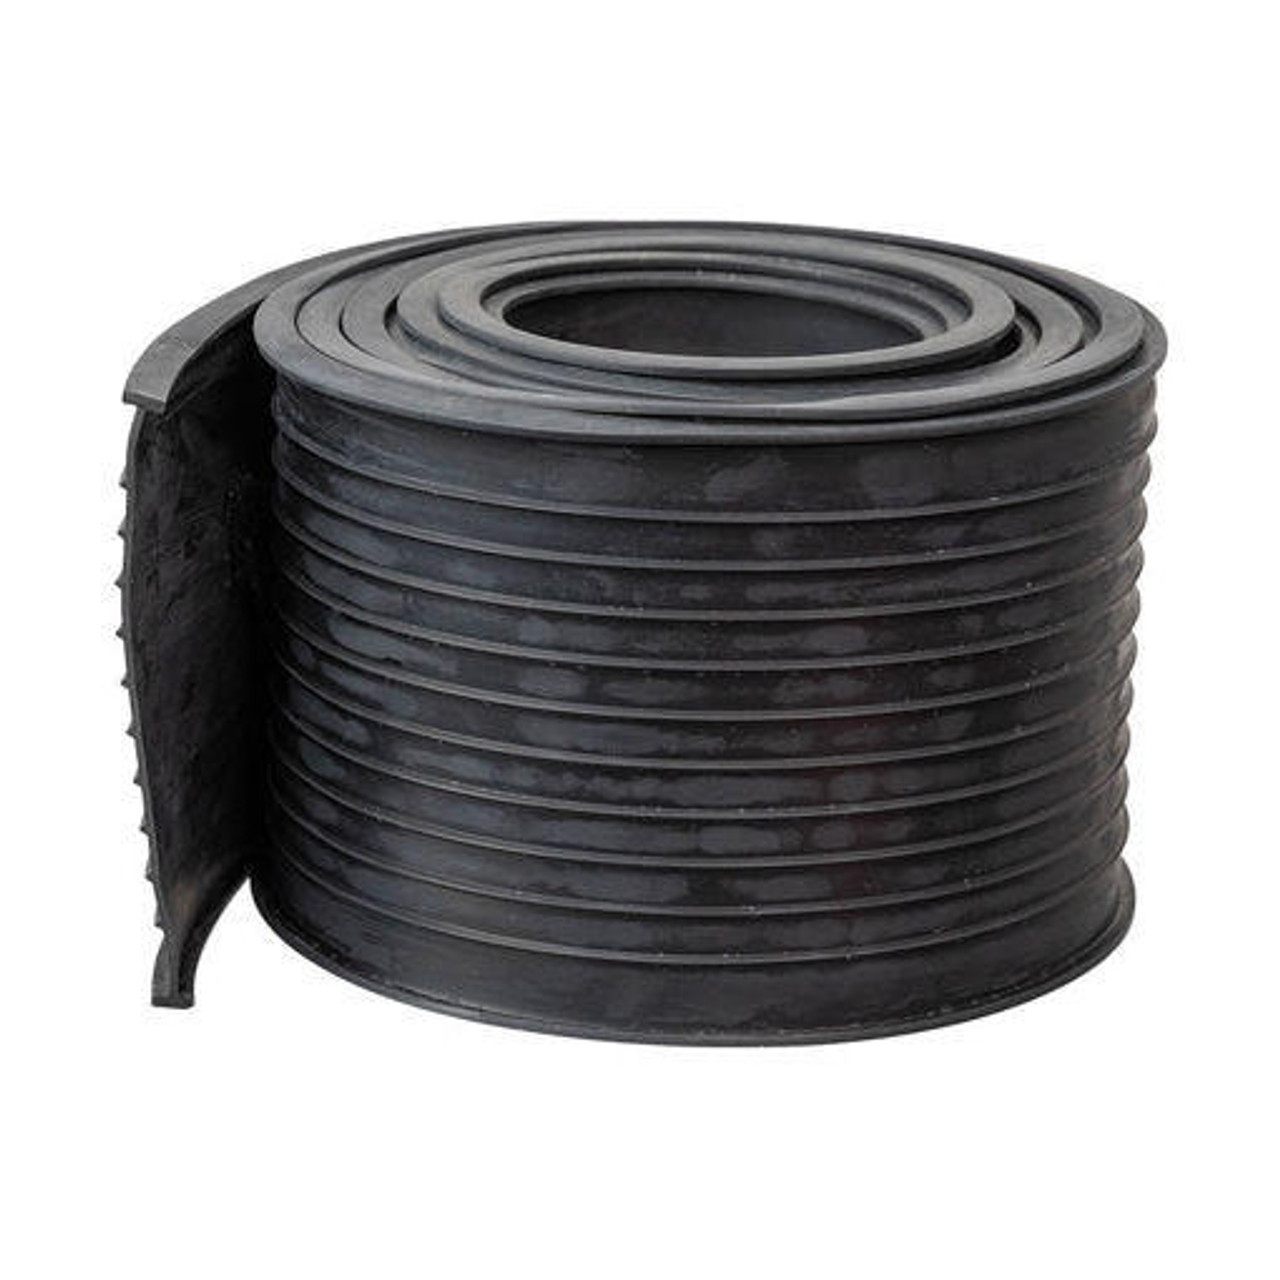 Get A Wholesale rubber door gasket for a Smooth Ride 